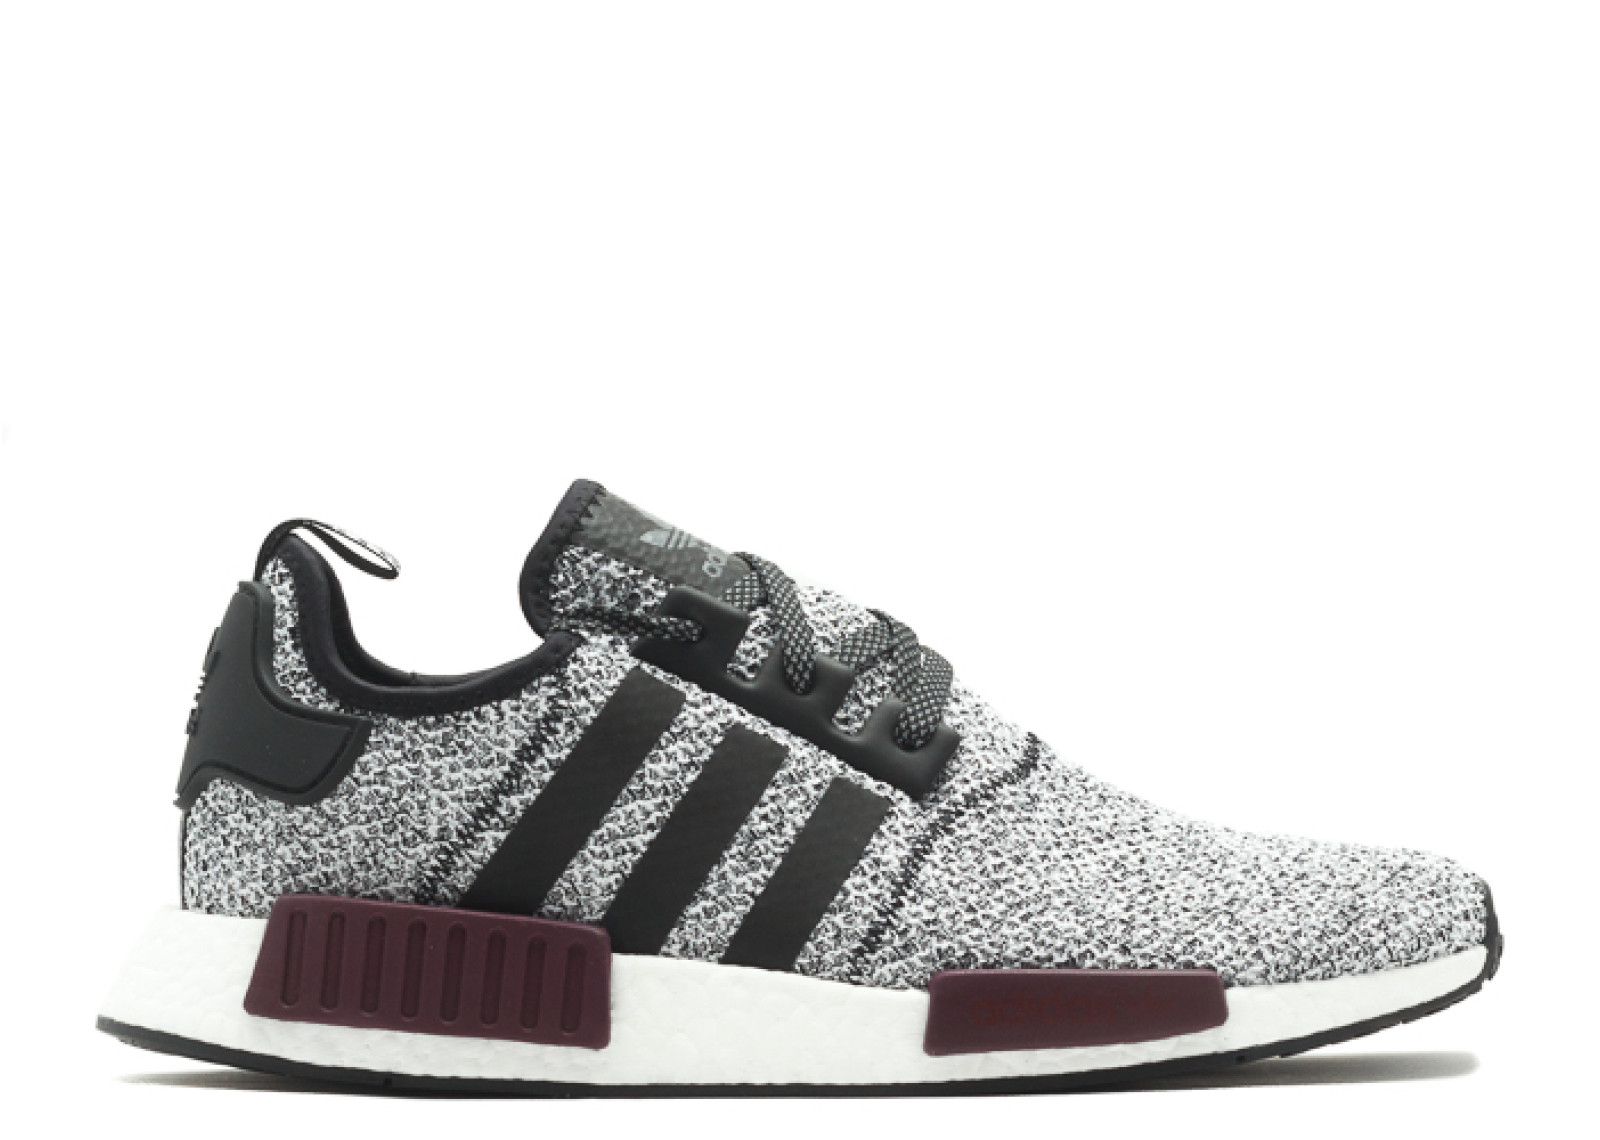 adidas champs exclusive nmd r1